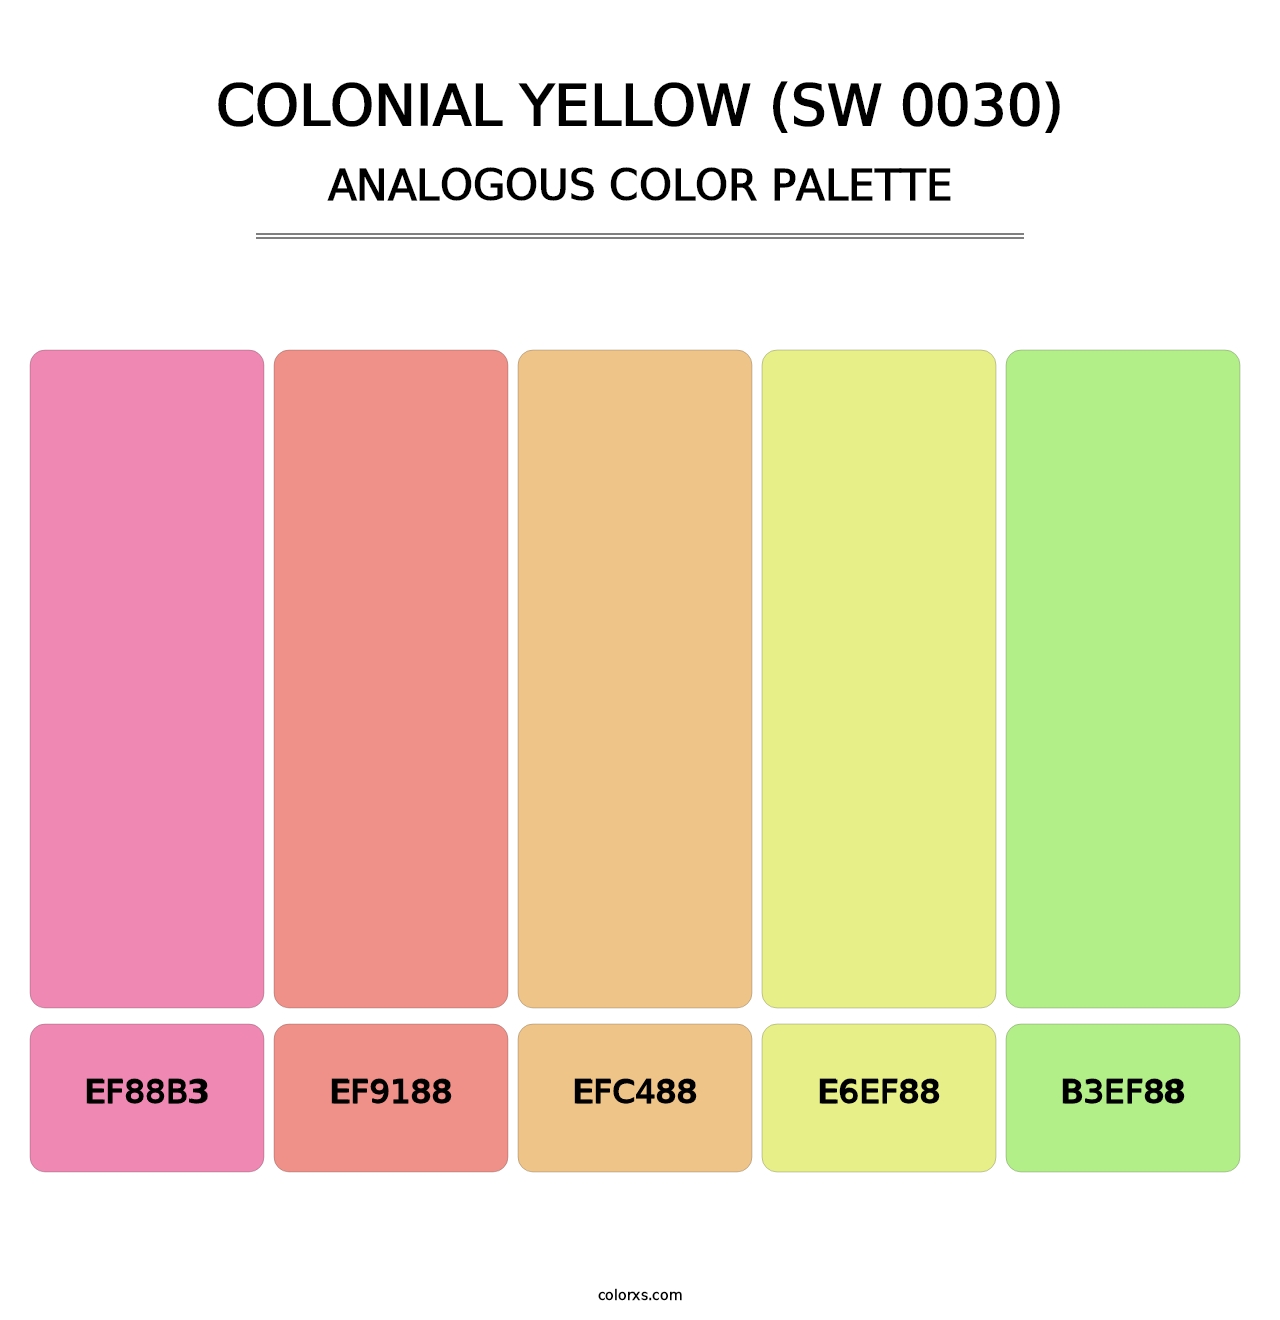 Colonial Yellow (SW 0030) - Analogous Color Palette